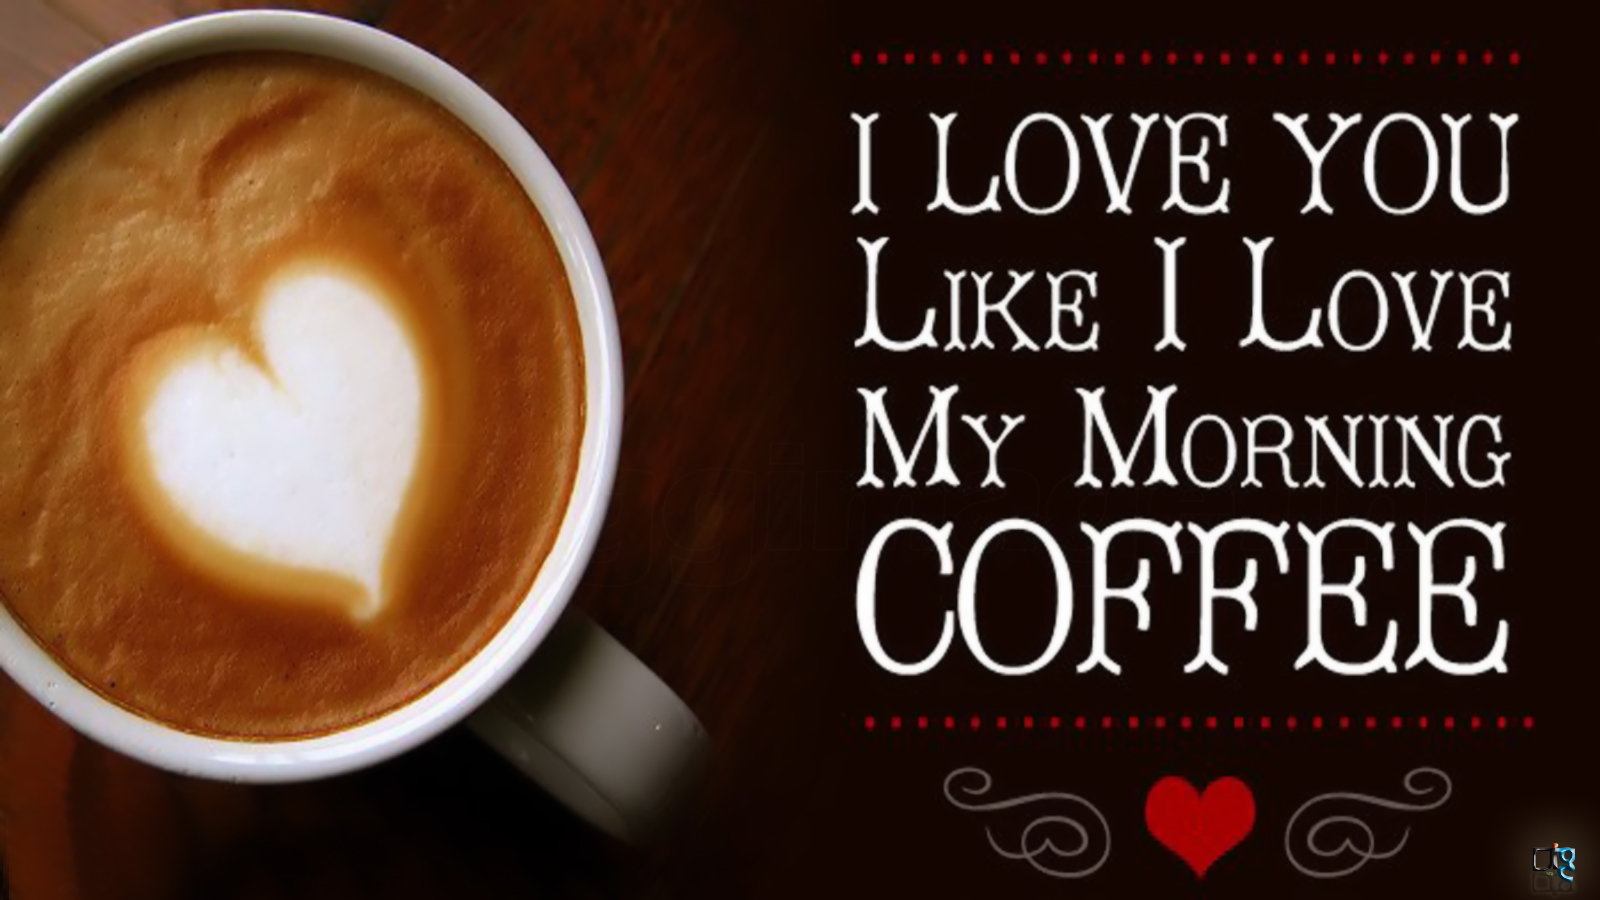 My Morning  coffee i love  you like you  with quotes  free 